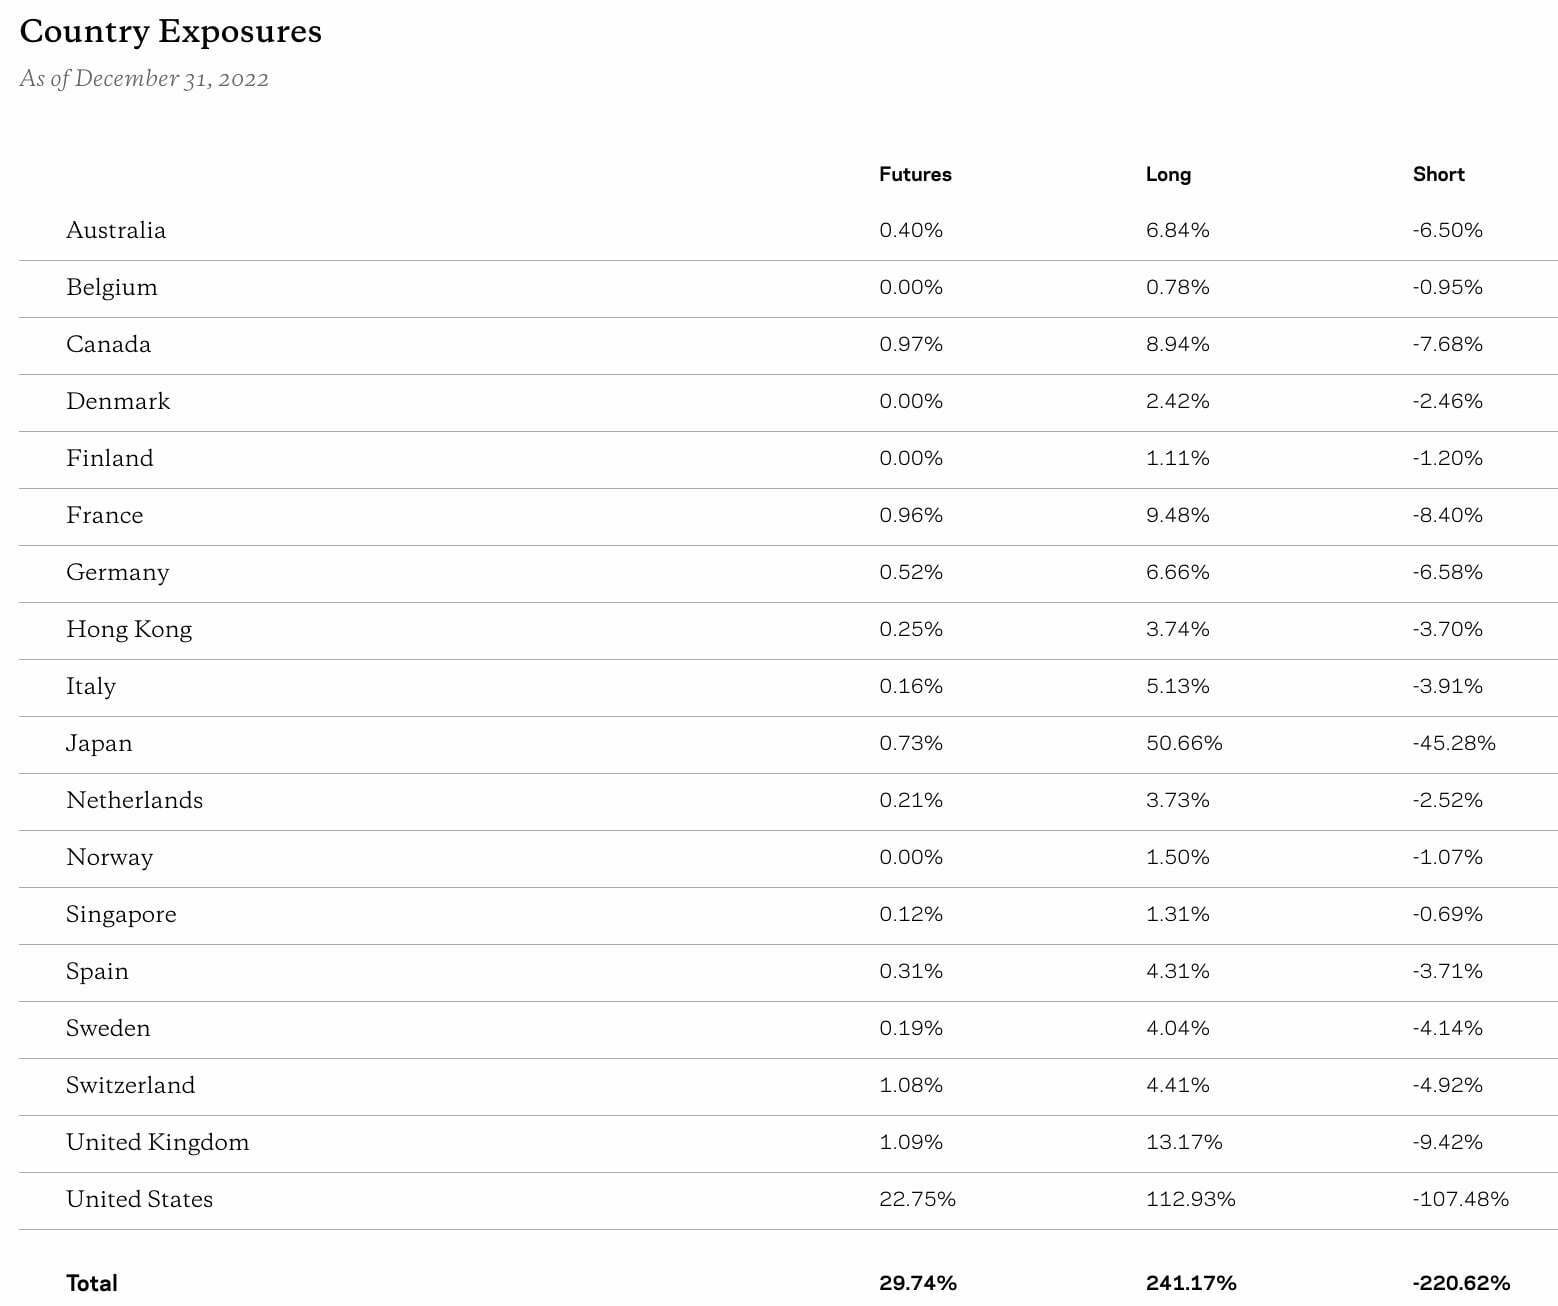 AQR Long-Short Equity Fund QLEIX Country Exposures: Futures + Long + Short 